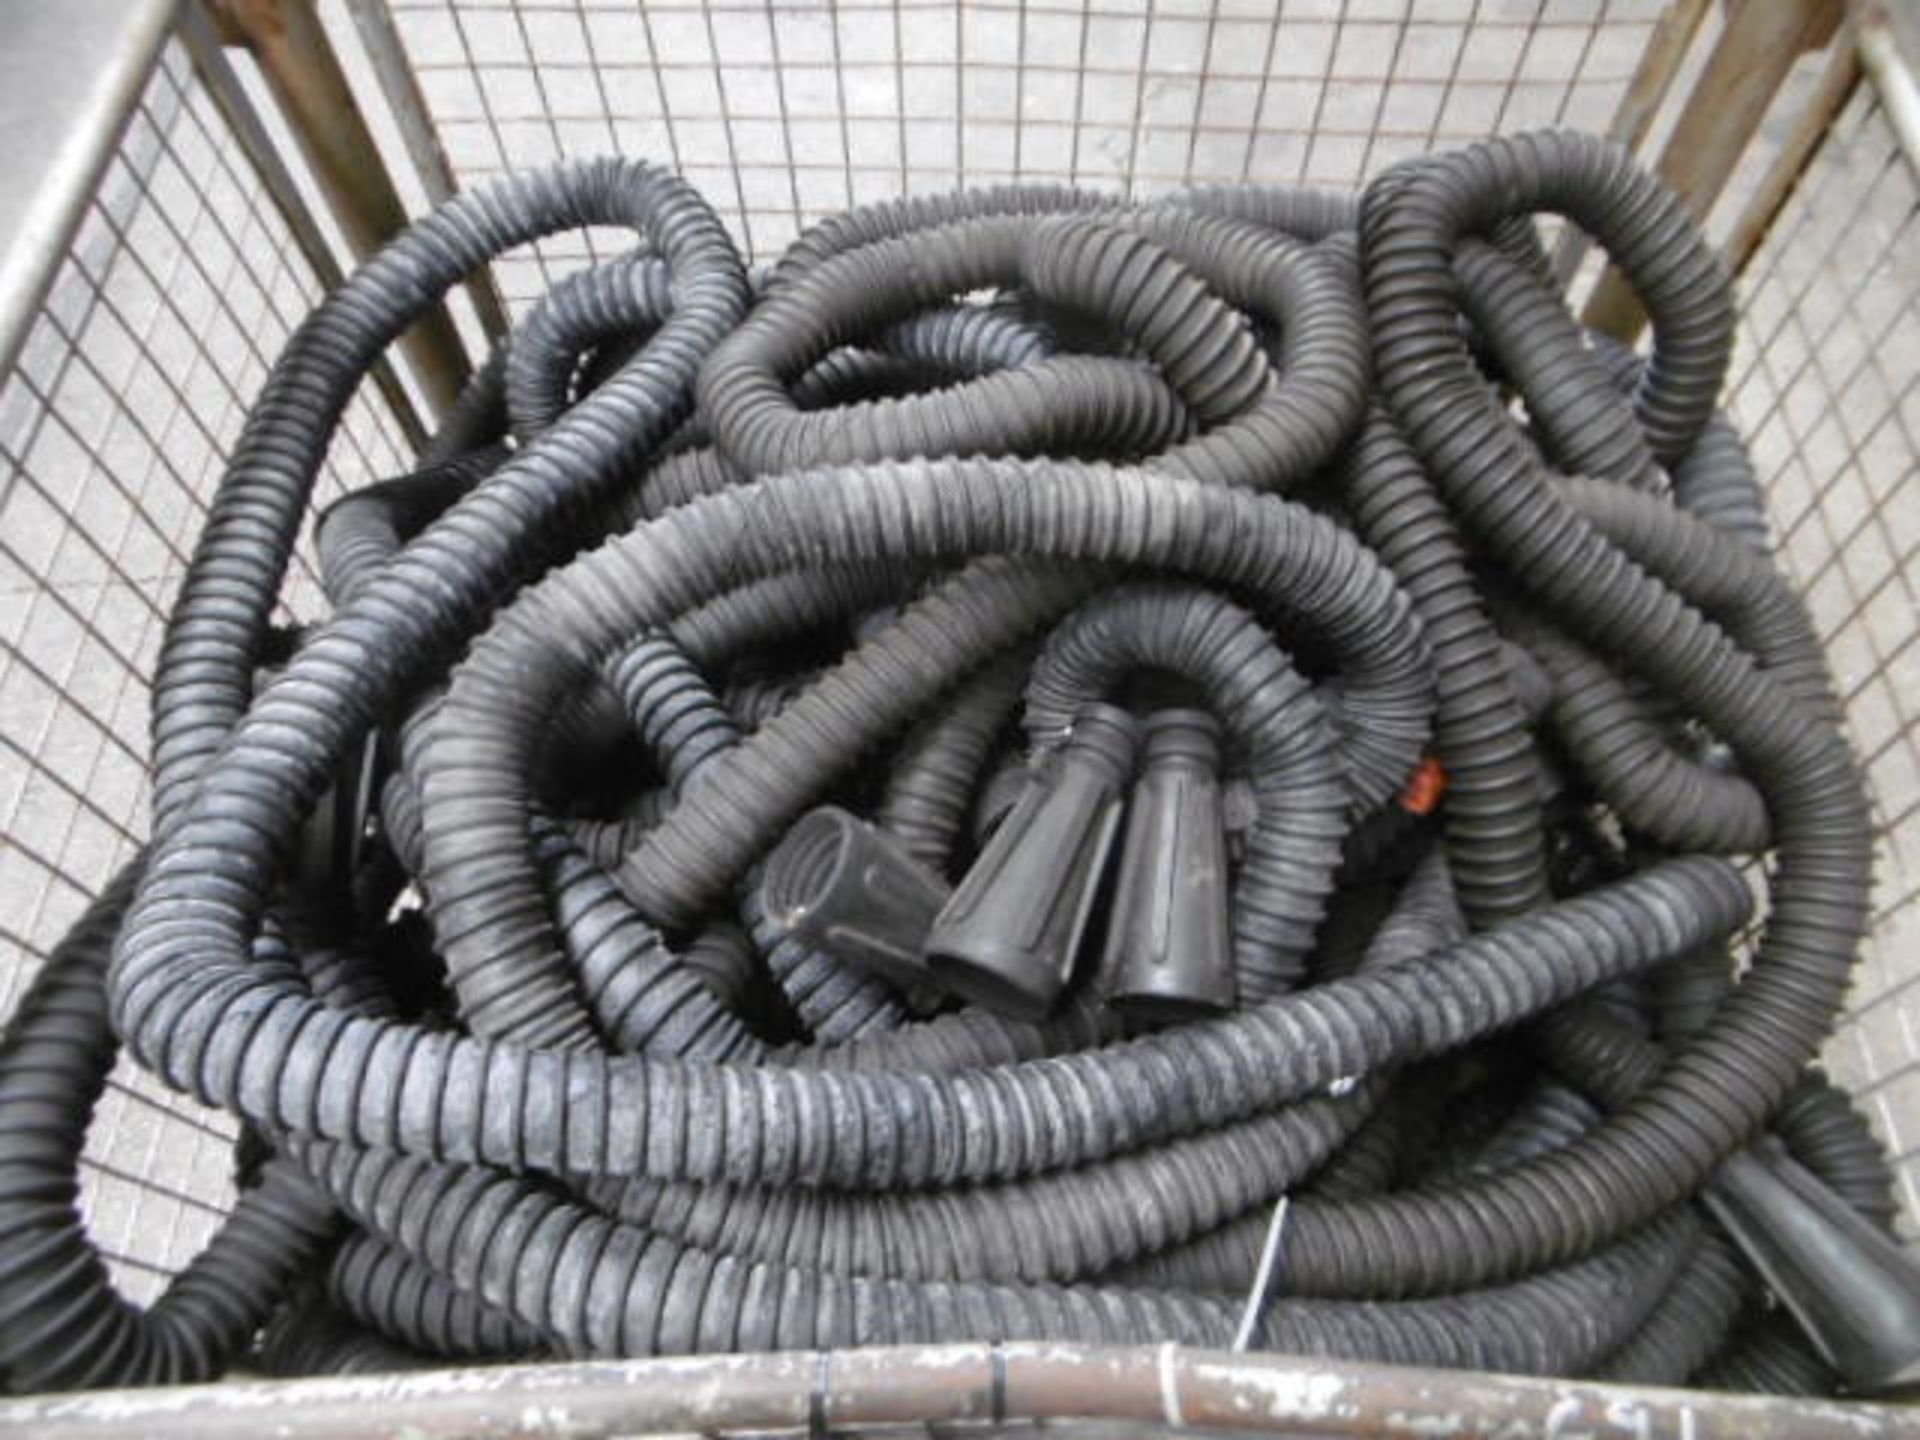 20 x Exhaust Disposal Hoses